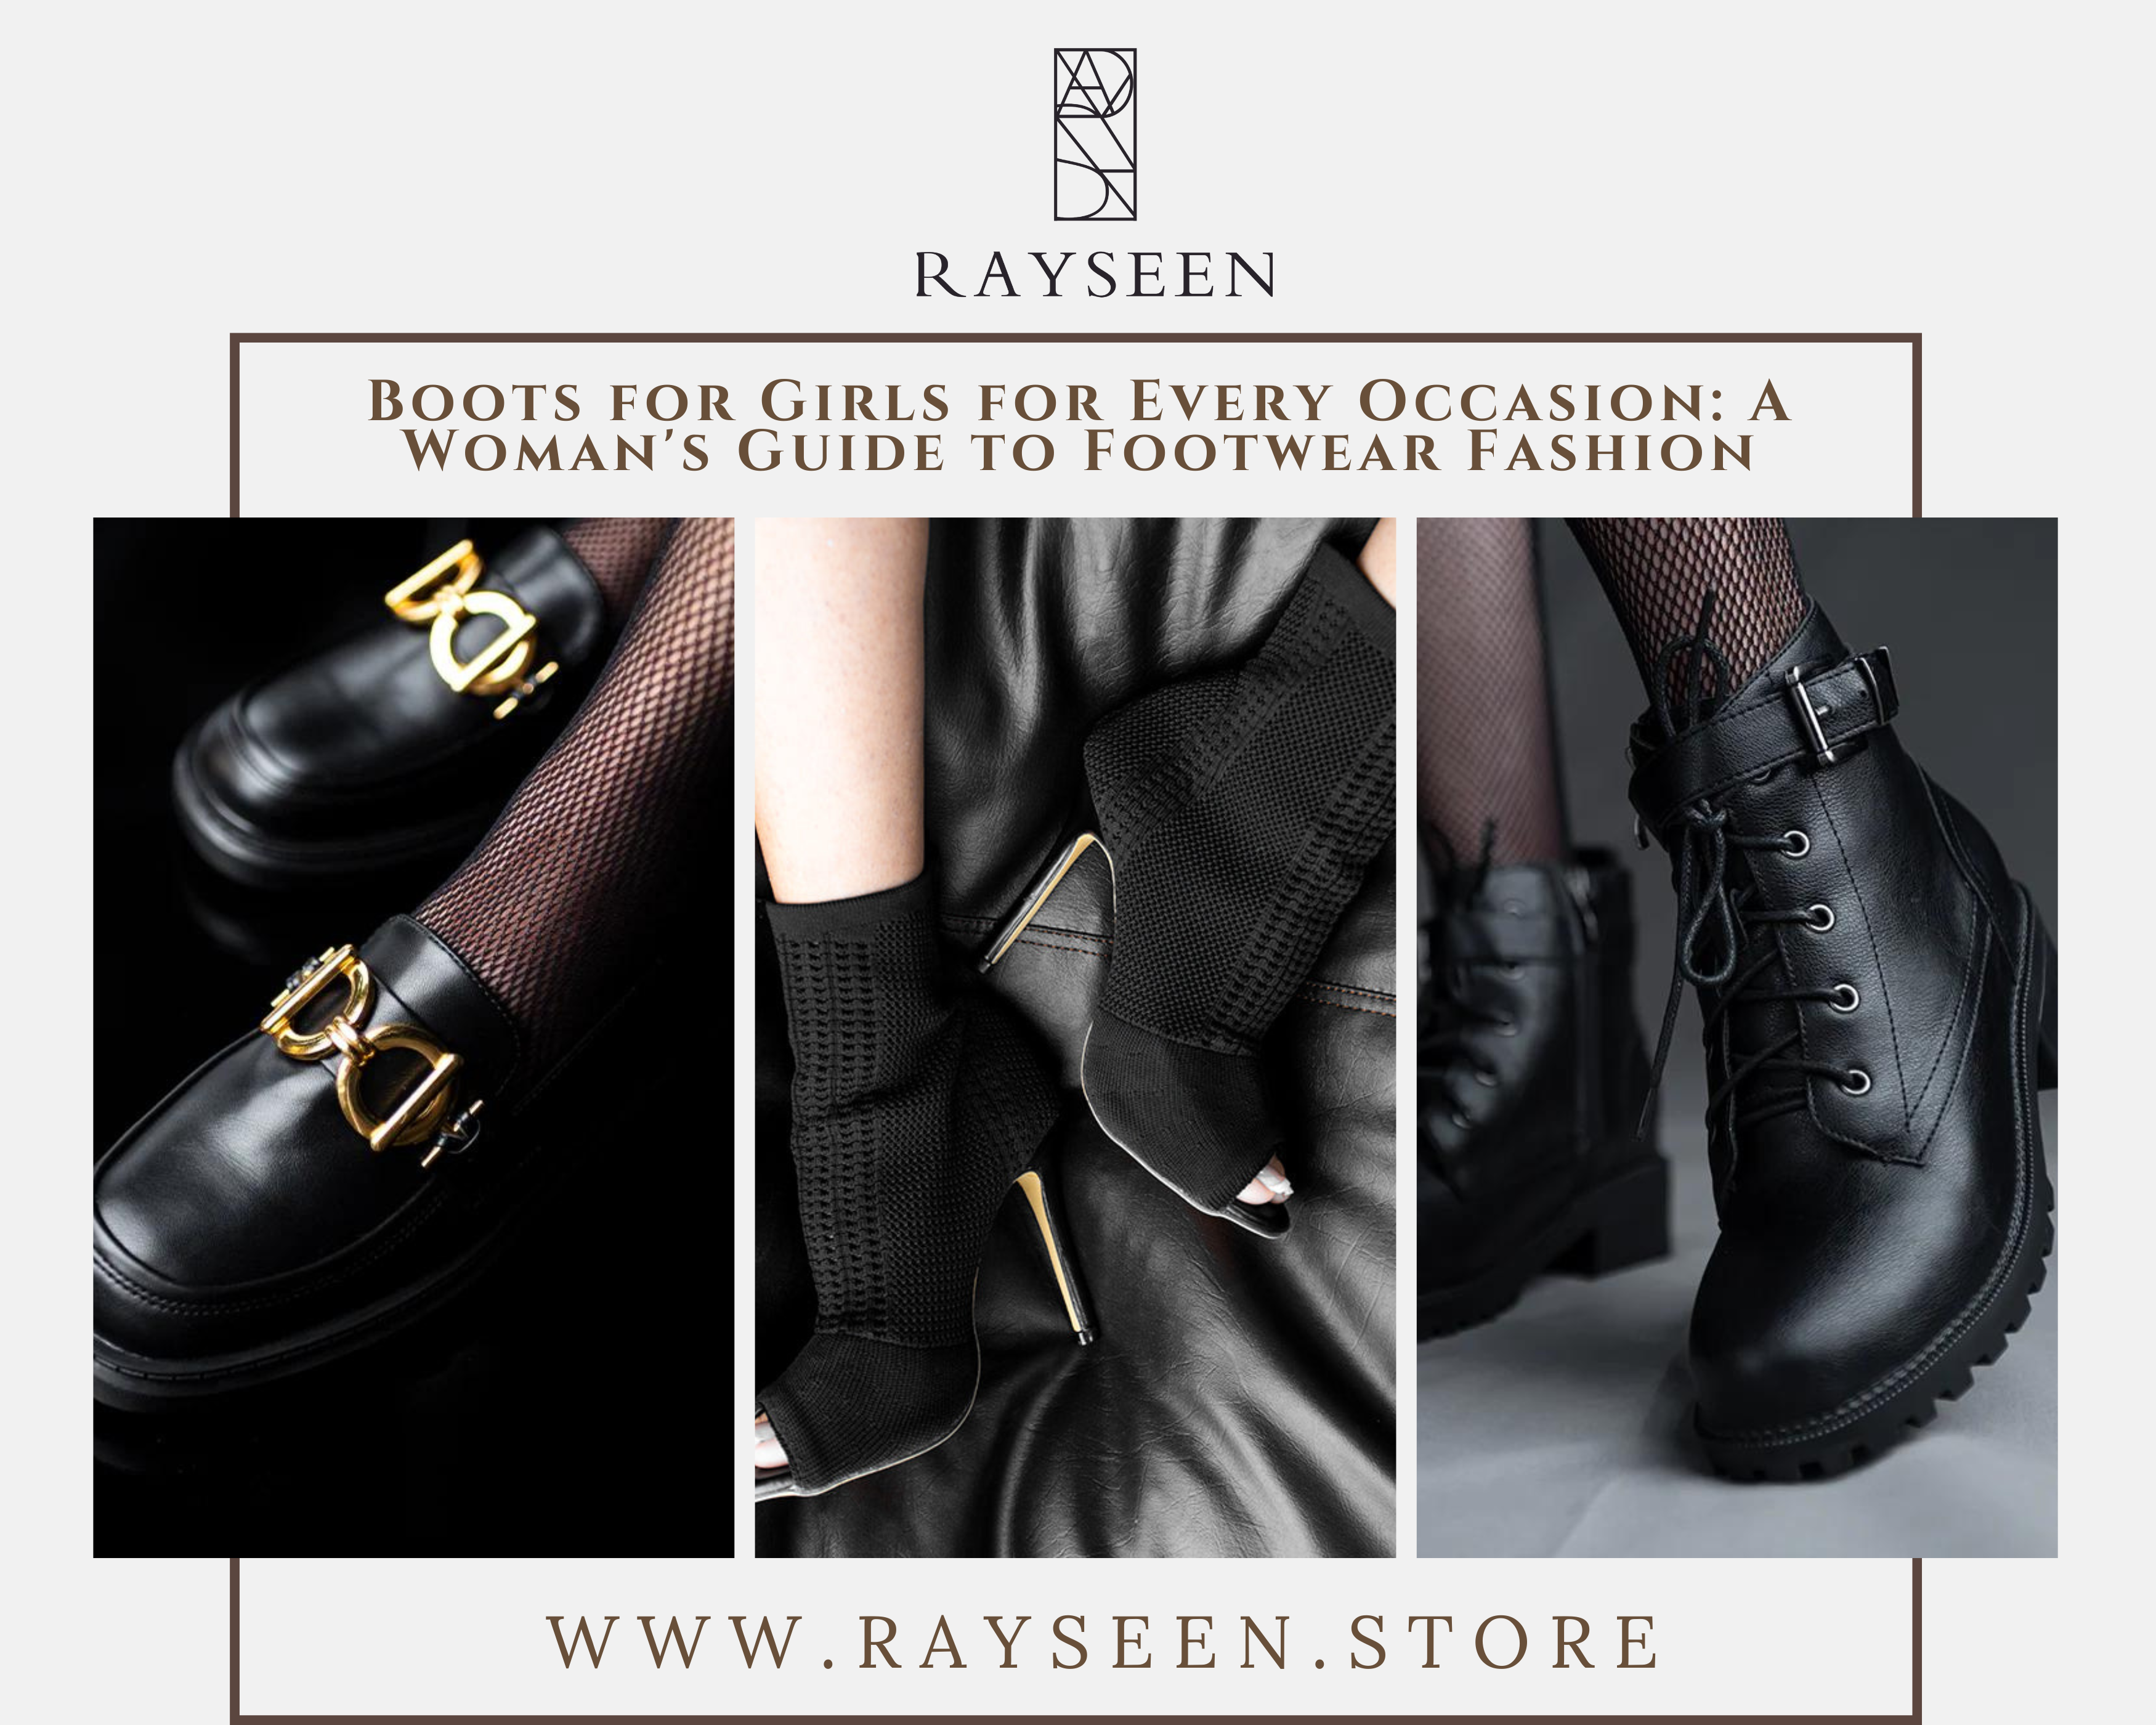 Boots for Girls for Every Occasion: A Woman's Guide to Footwear Fashion